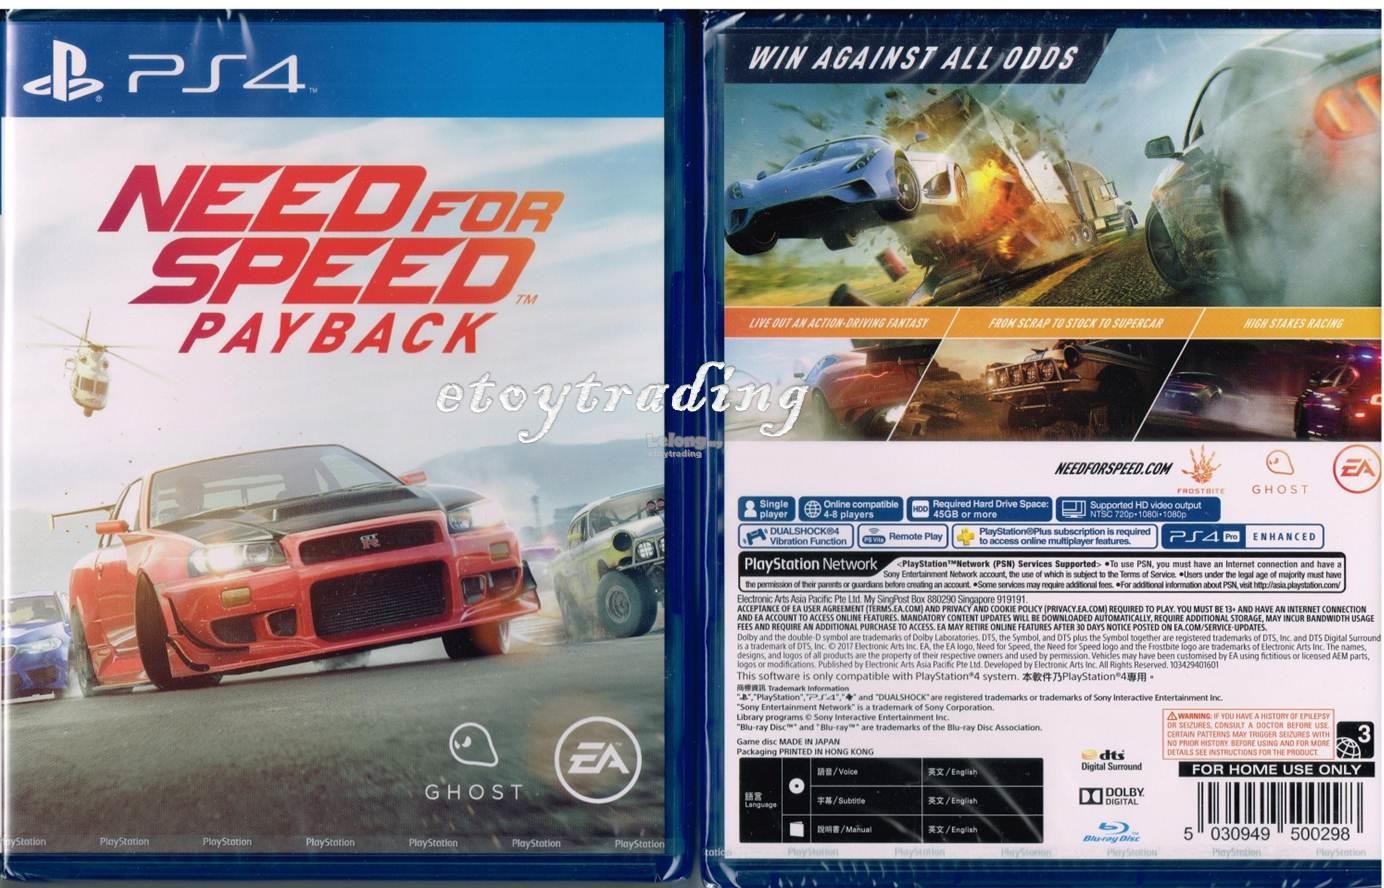 Nfs payback ps4. NFS Payback на ПС 4. Need for Speed Payback пс4. Need for Speed Payback ps4 диск. Need for Speed Speed Payback ps4.